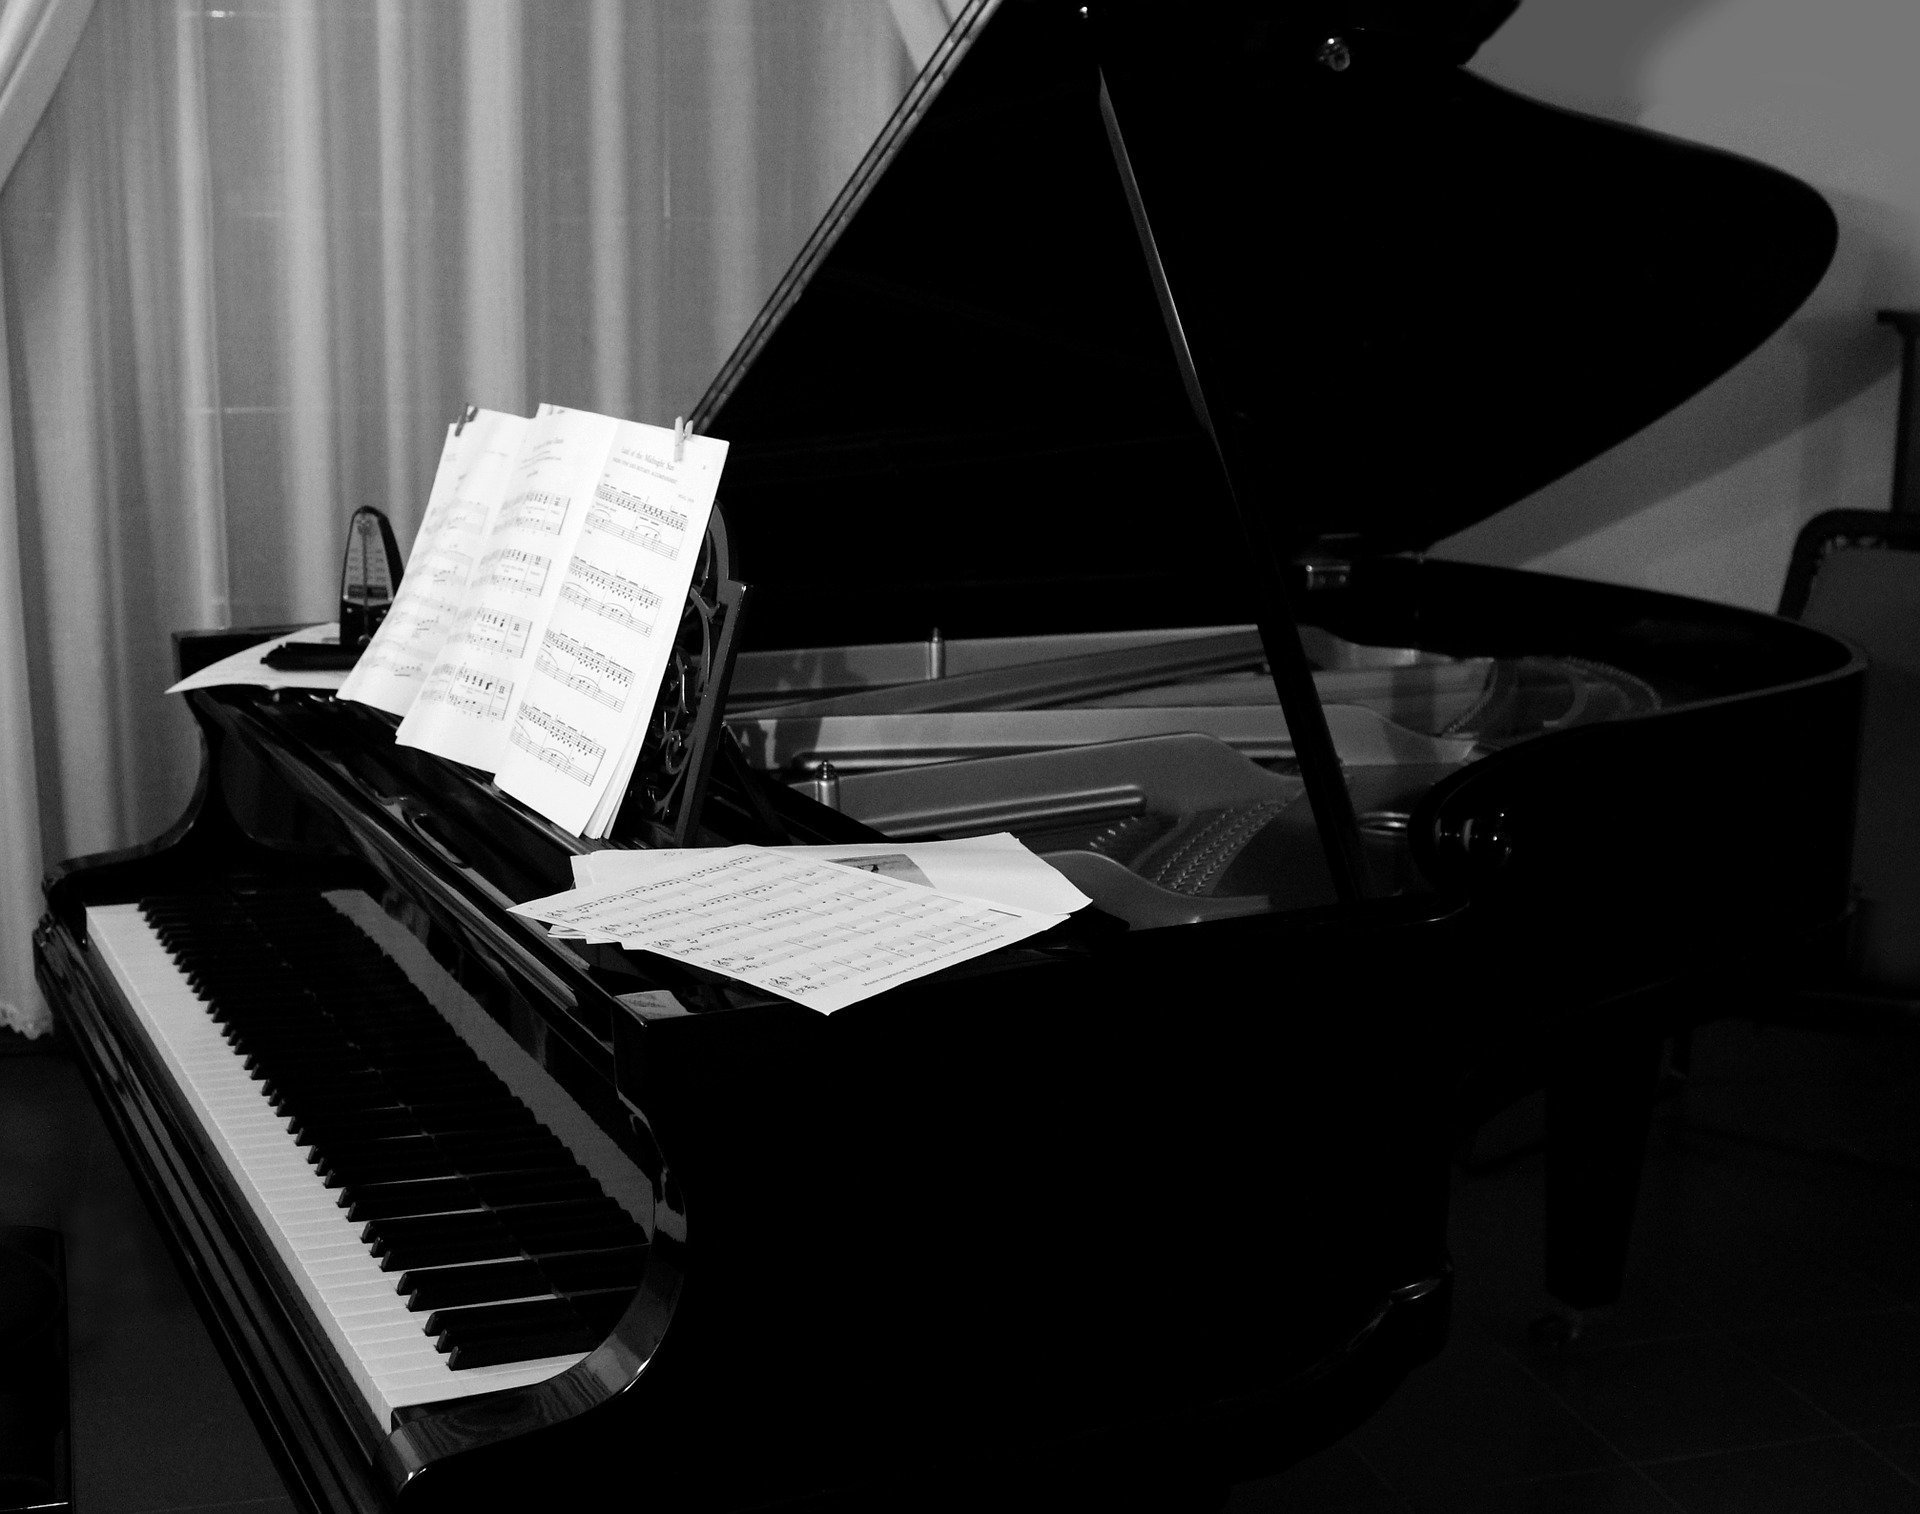 Music on Stream. Represented by a Black and white photo of a Grand Piano.